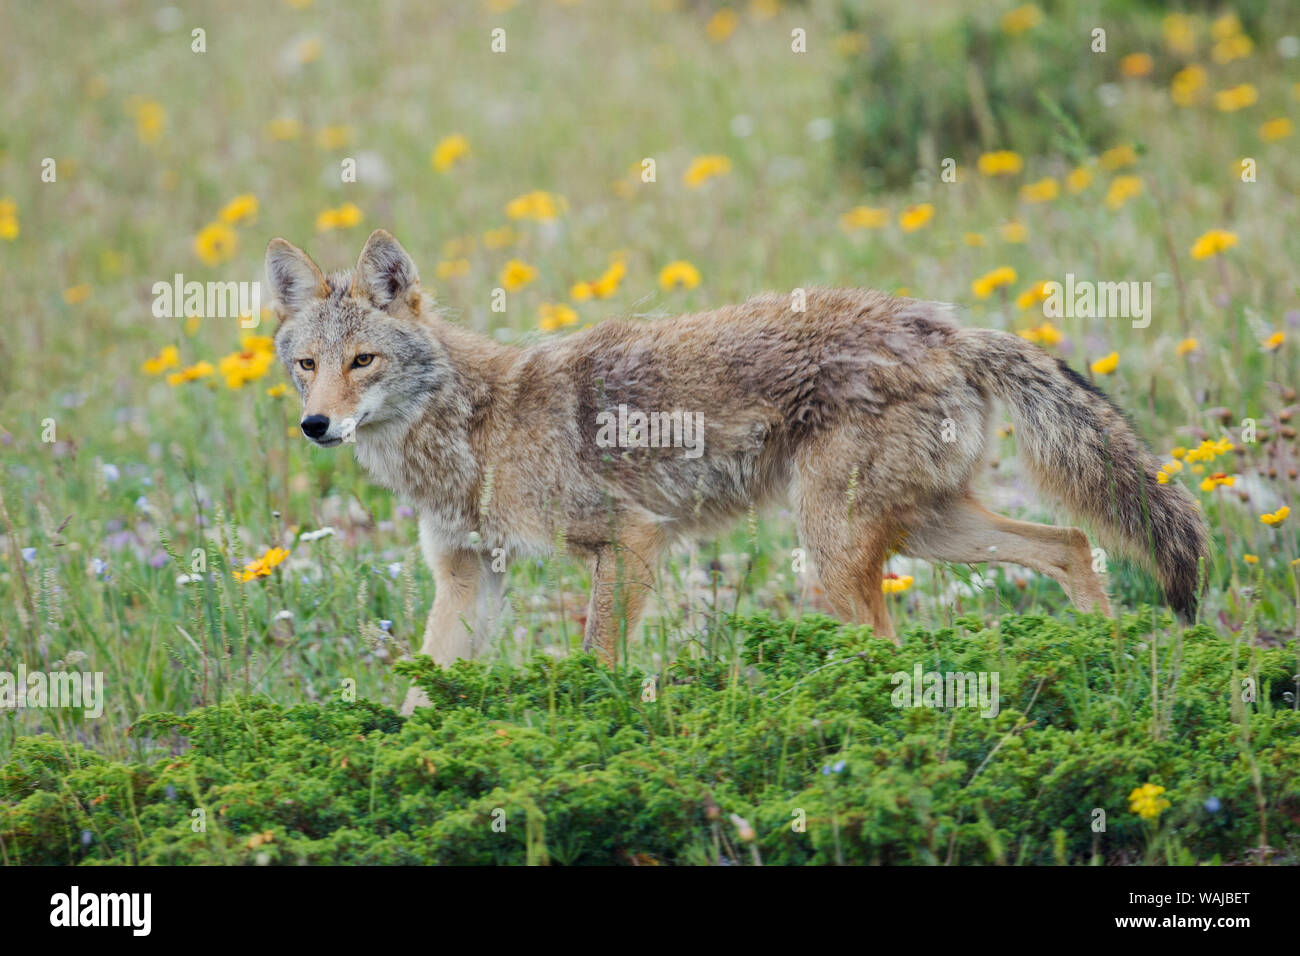 Coyote late spring Stock Photo